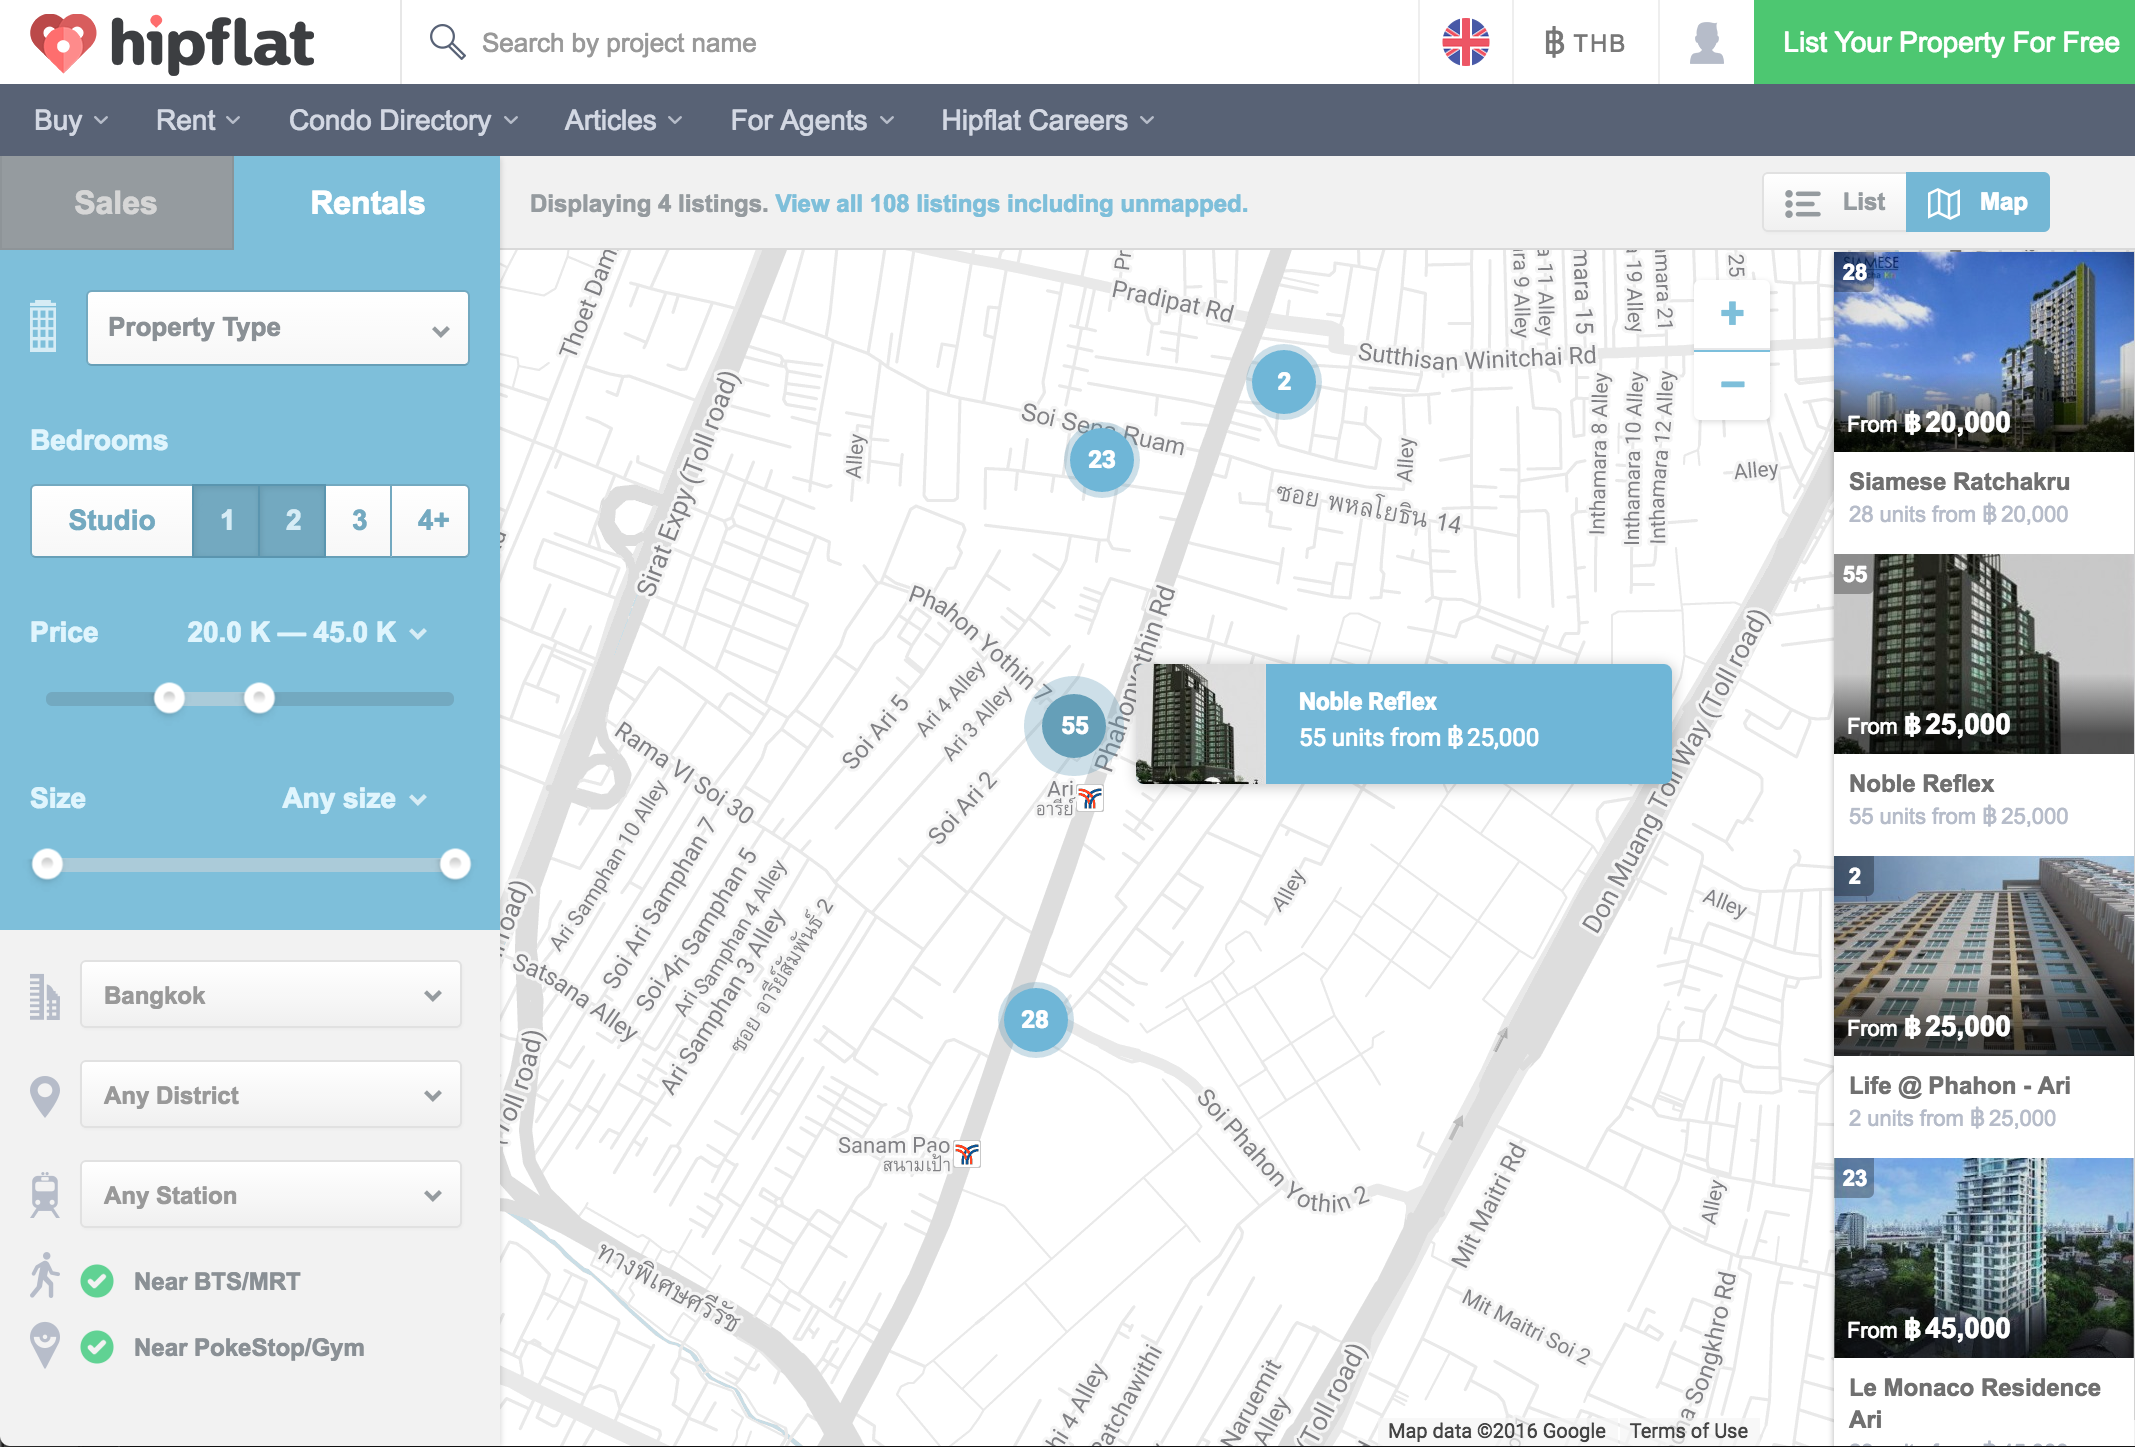 Hipflat offers a search option to display properties located near a Pokemon Stop or Gym